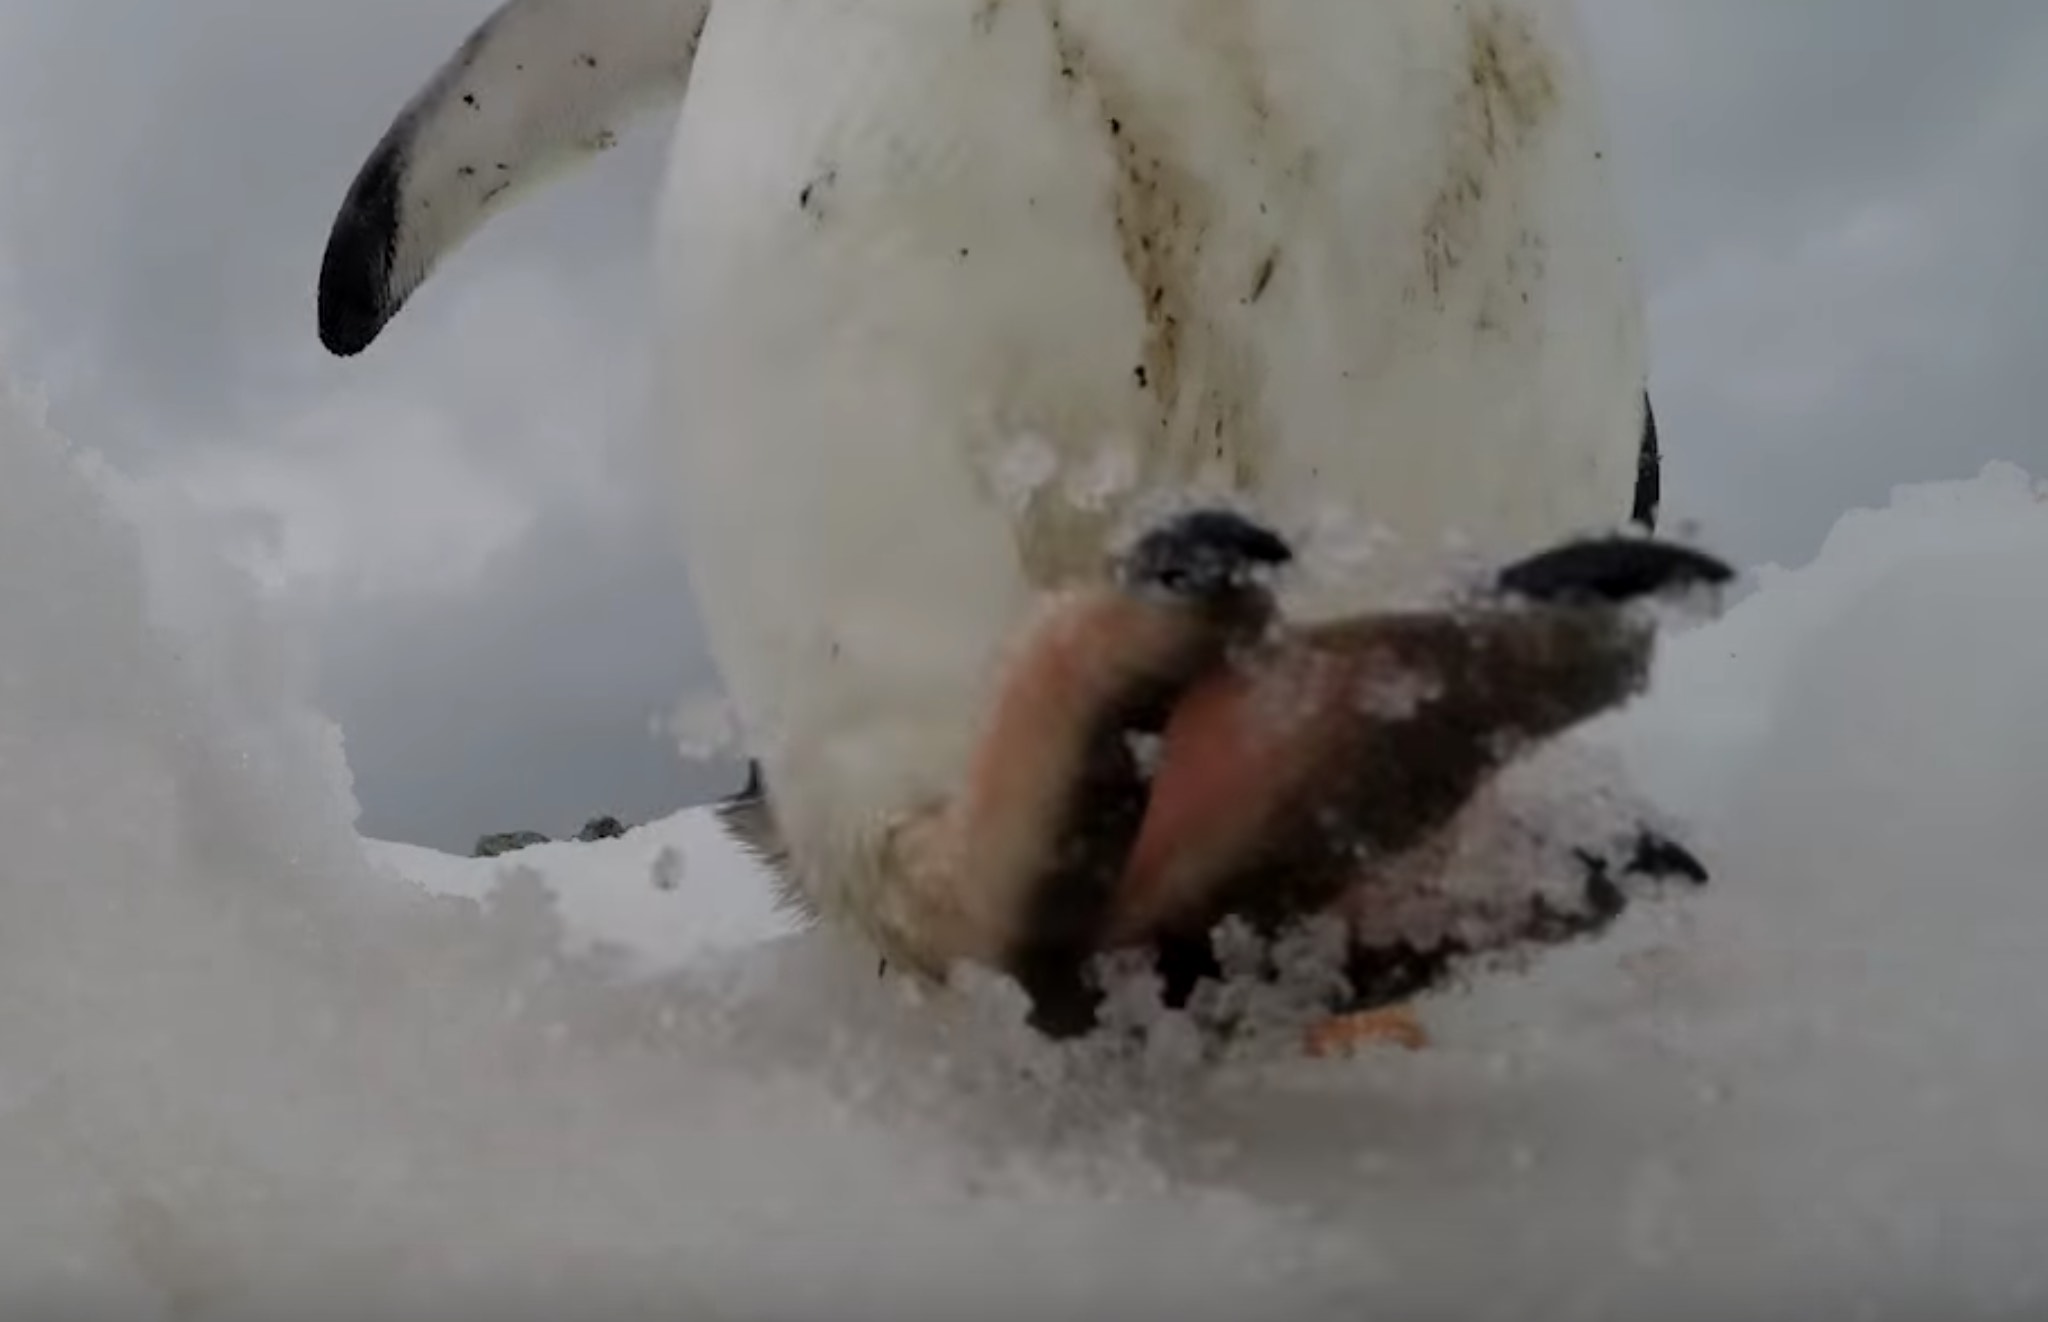 penguin's foot stepping down onto the camera's lens